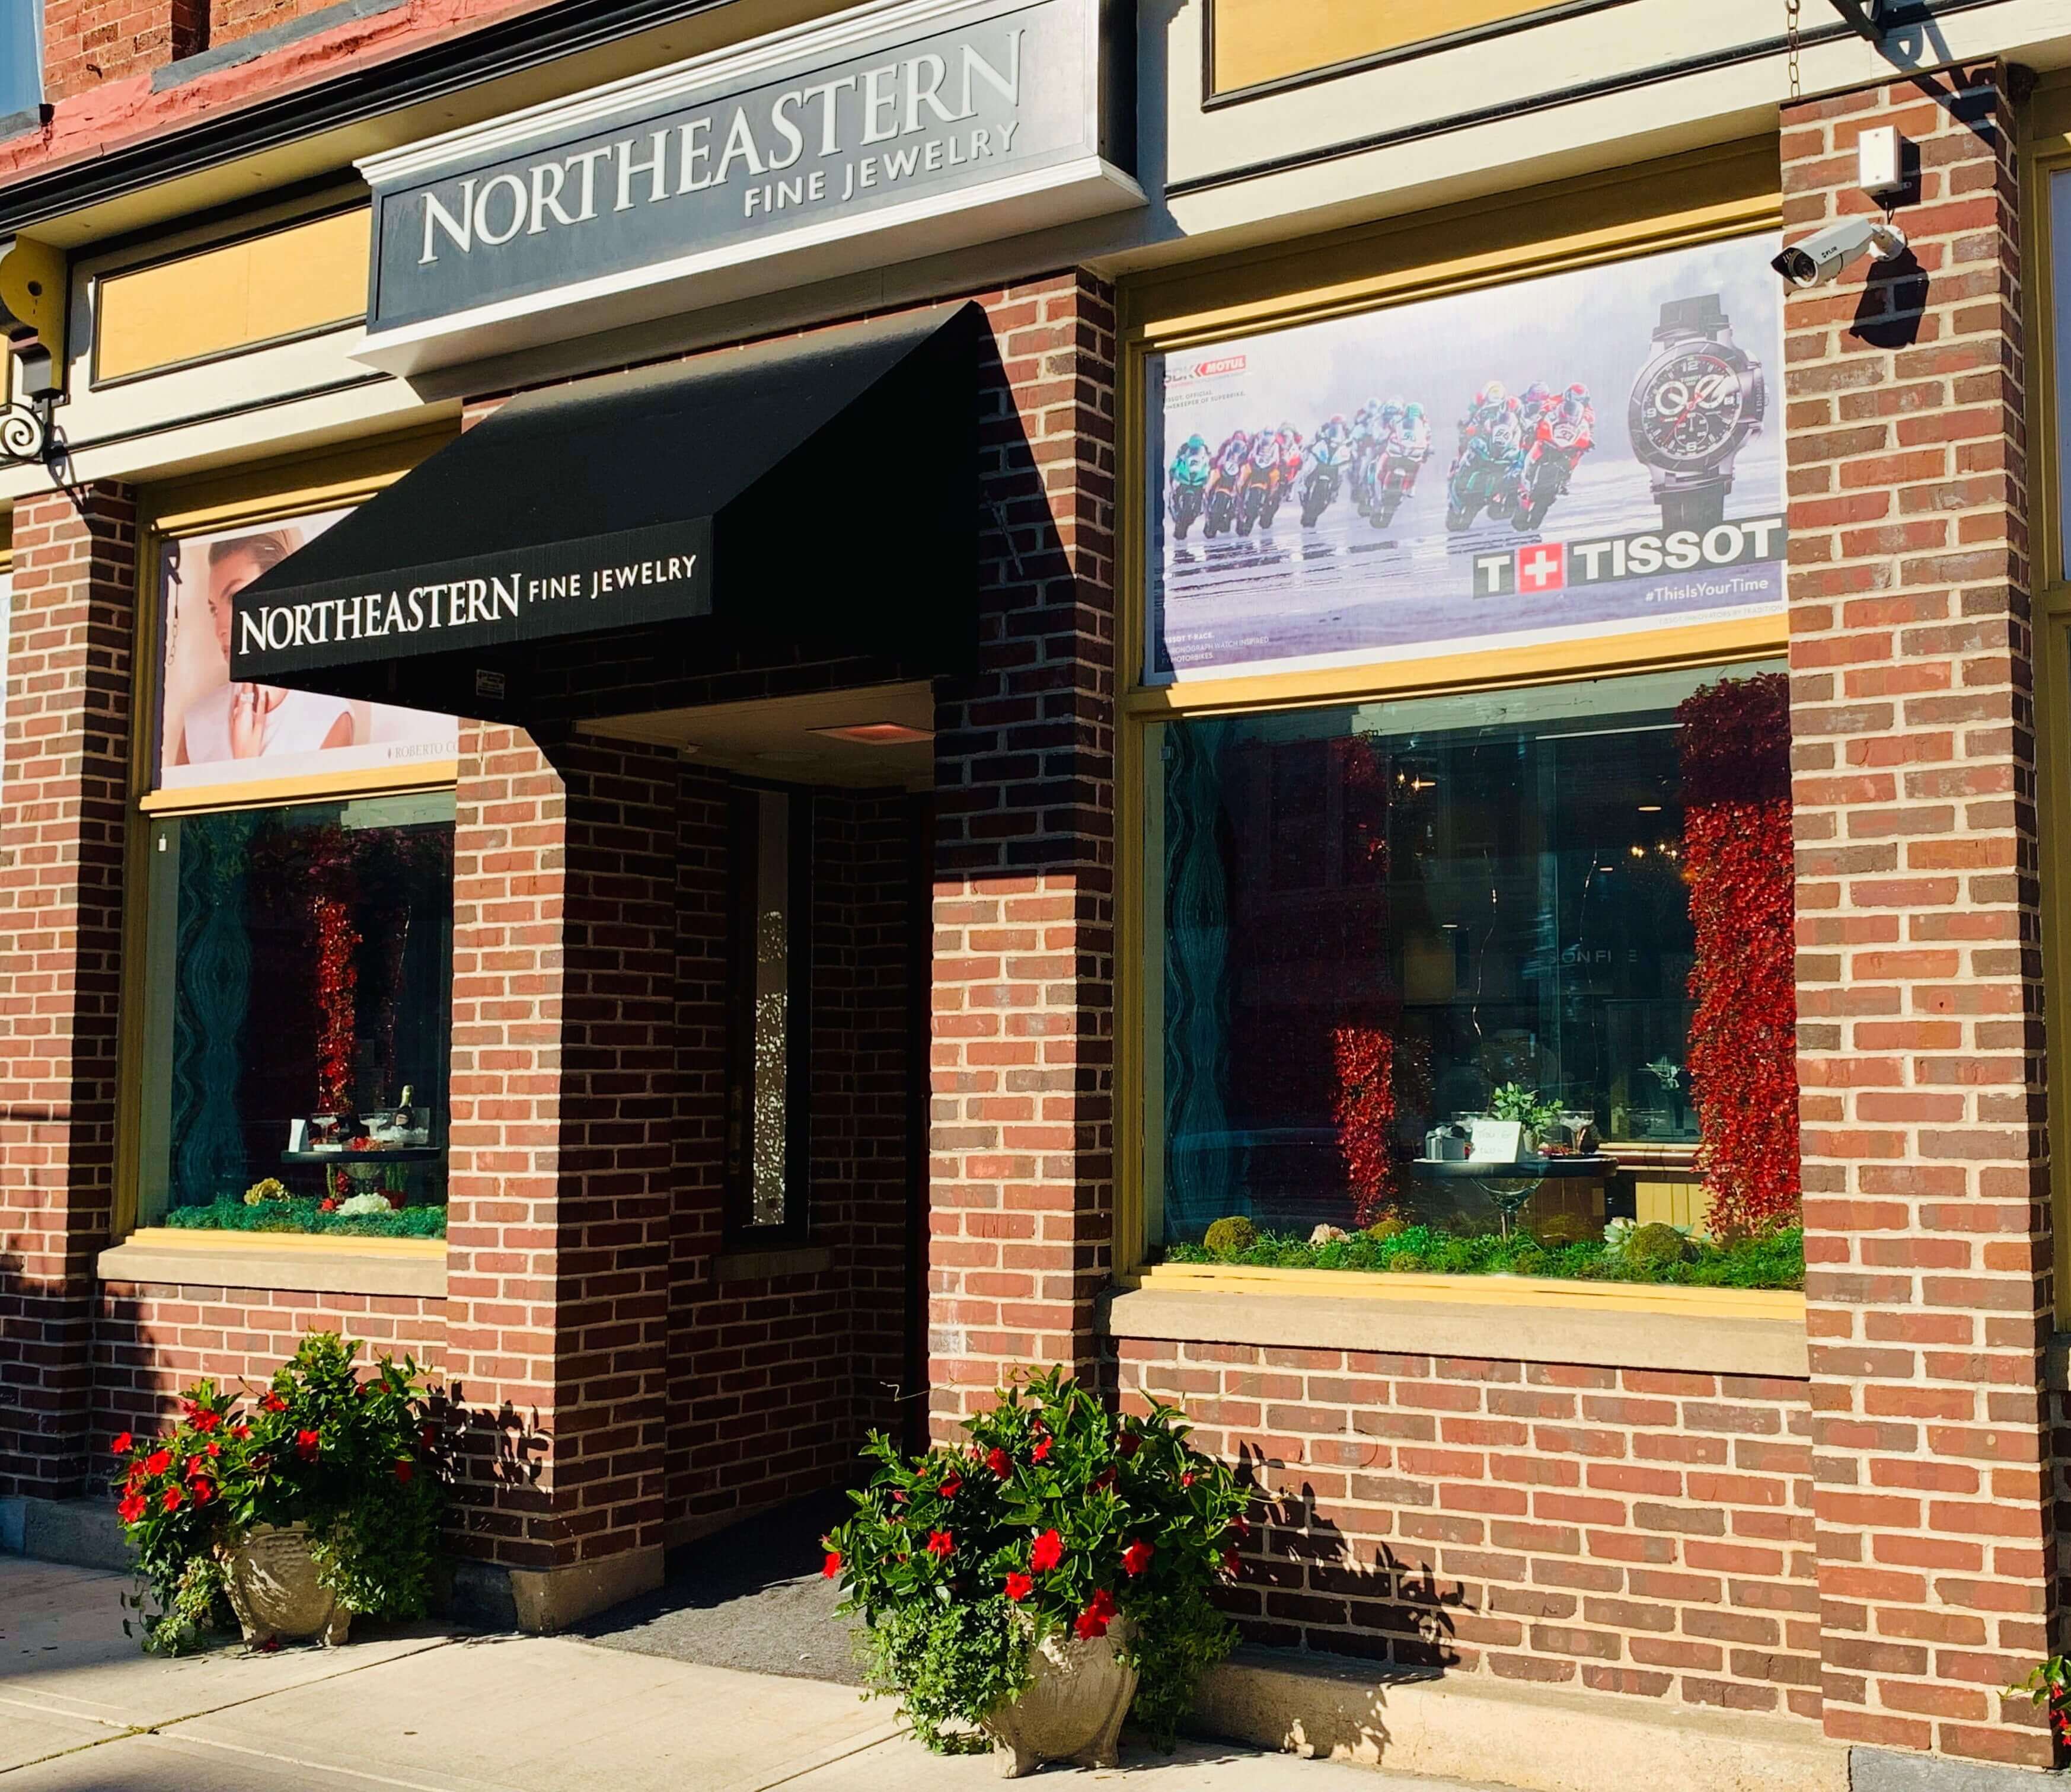 Visit the Northeastern Fine Jewelry Albany and Schenectady Stores for a 20% Off Sale